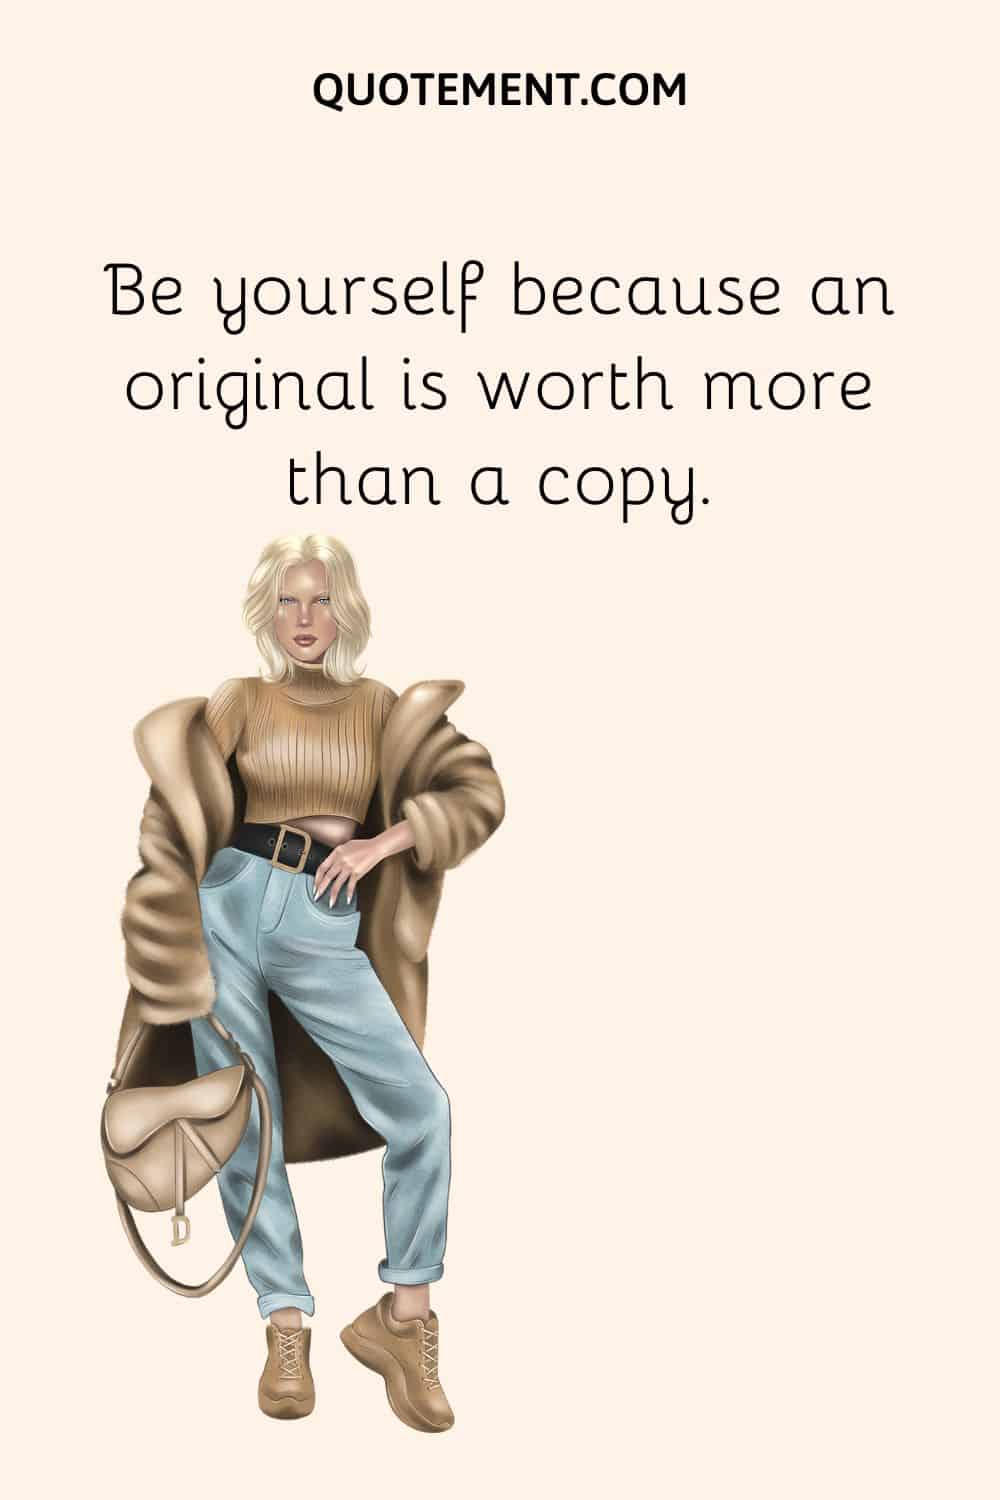 Be yourself because an original is worth more than a copy